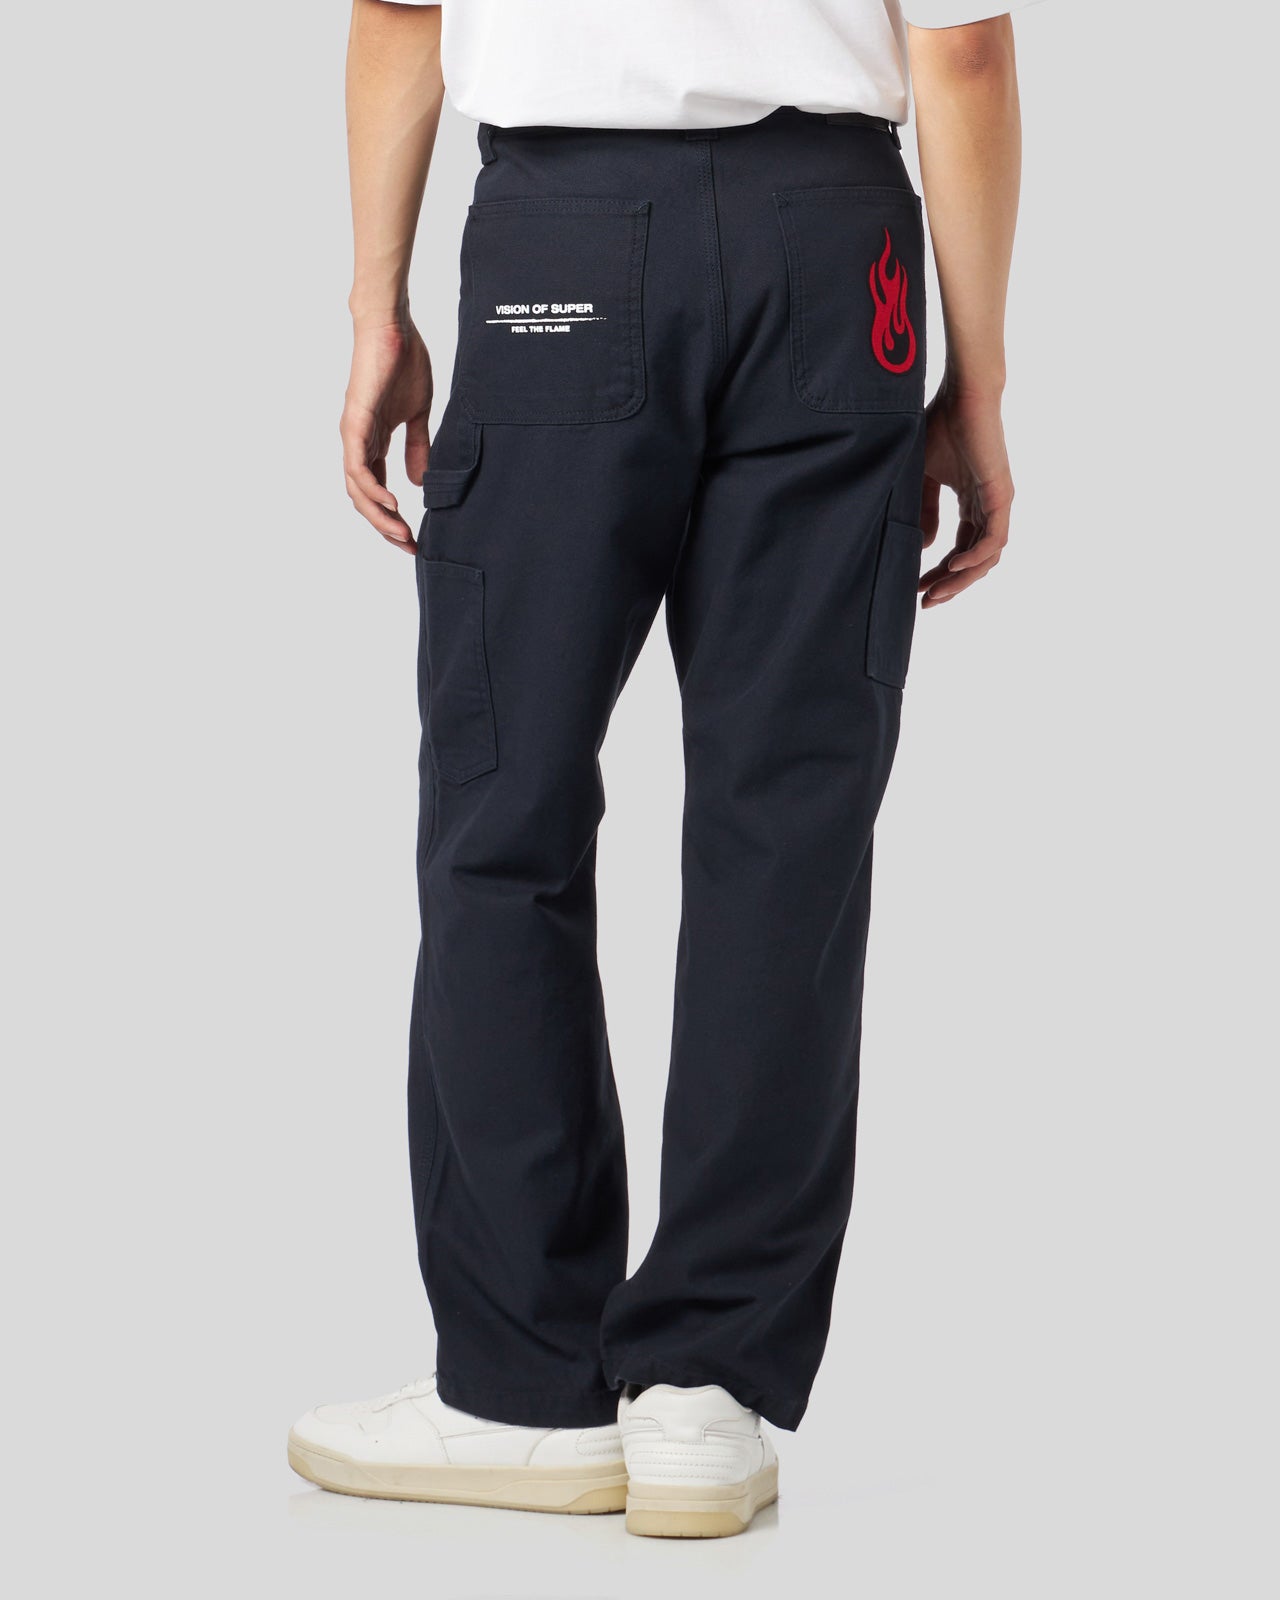 DARK BLUE WORKER PANTS WITH ICONIC FLAMES PATCH